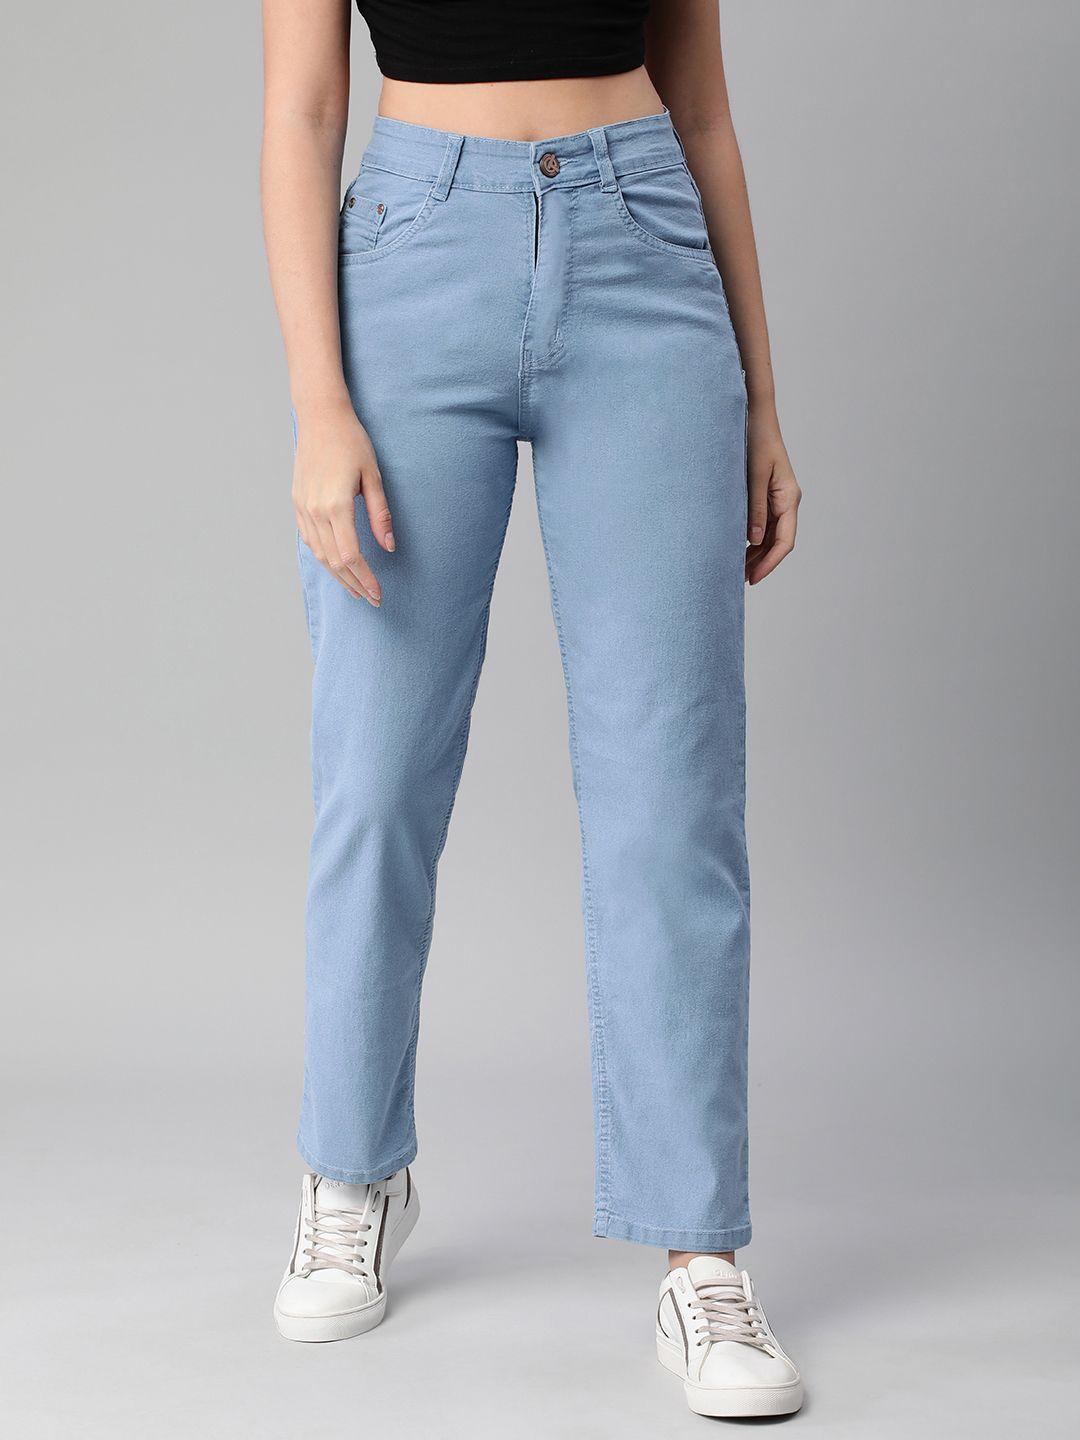 adbucks straight fit high-rise stretchable jeans